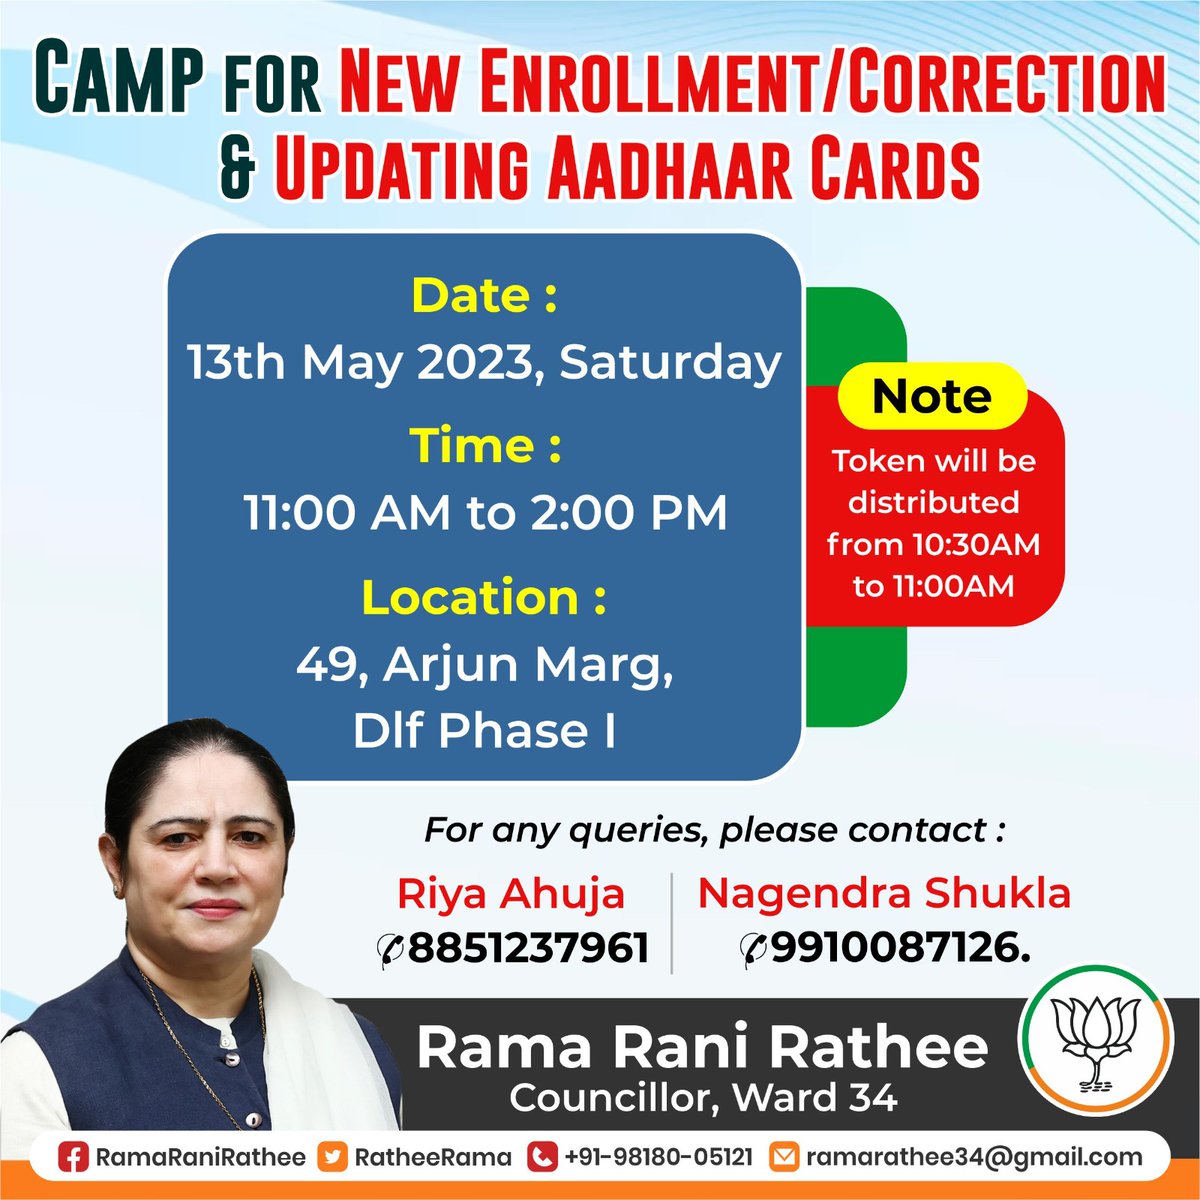 Respected Residents,

We are organising a Aadhar Card Camp (Correction/ New Enrollment/ Updation  Aadhaar cards on Saturday 13th May 2023 at 49 Arjun Marg, DLF City Phase I from 11:00 AM to 2:00 PM.
#RamaRaniRathee
#MunicipalCouncillor #Ward34
#MunicipalCorporation #Gurgaon